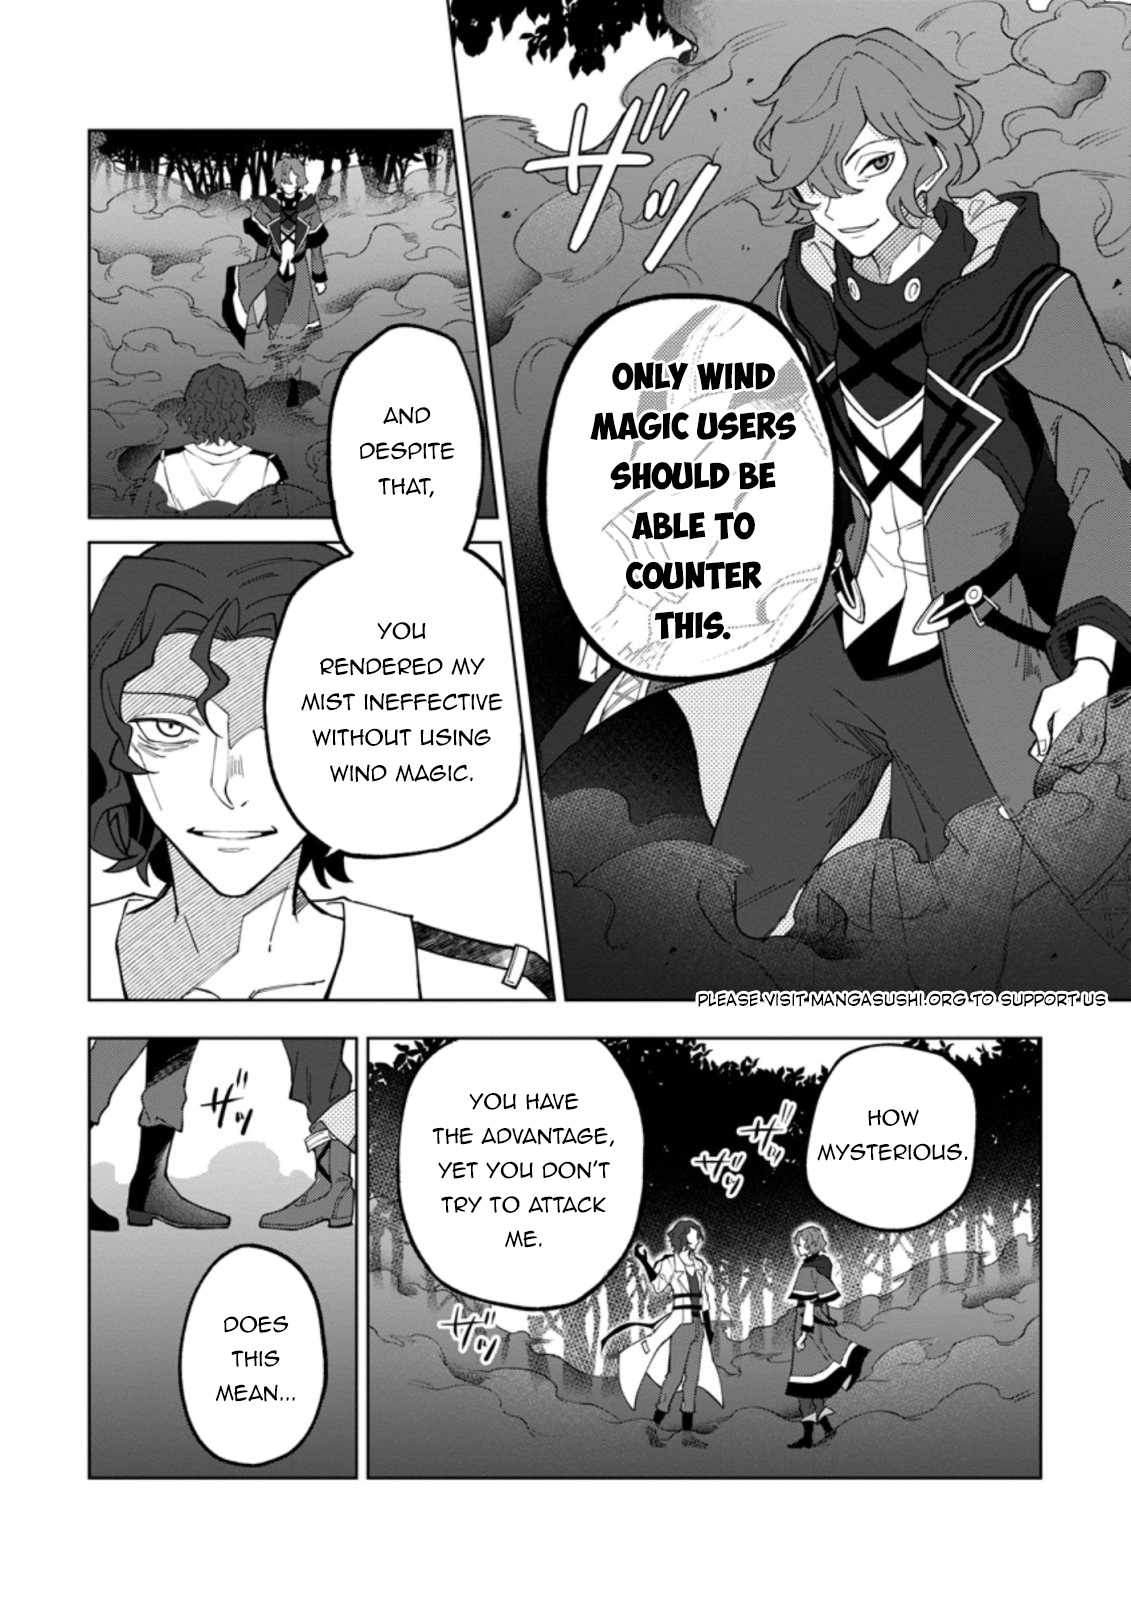 The White Mage Who Was Banished From the Hero's Party Is Picked up by an S Rank Adventurer ~ This White Mage Is Too Out of the Ordinary! Chapter 17-1-eng-li - Page 10